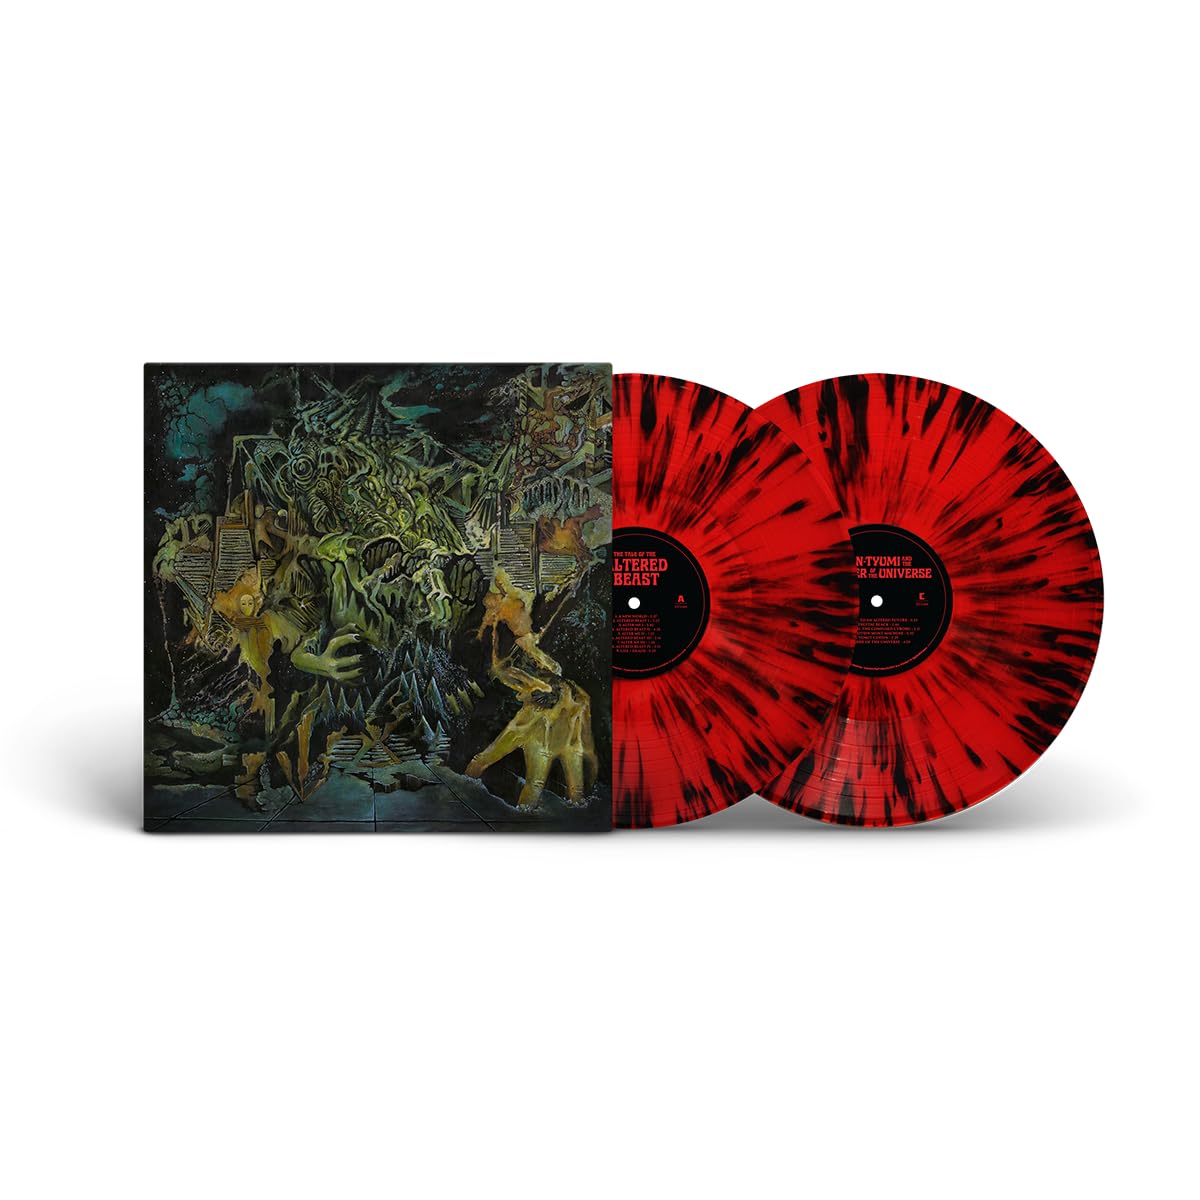 Murder Of The Universe (Cosmic Carnage Edition) (Vinyl)